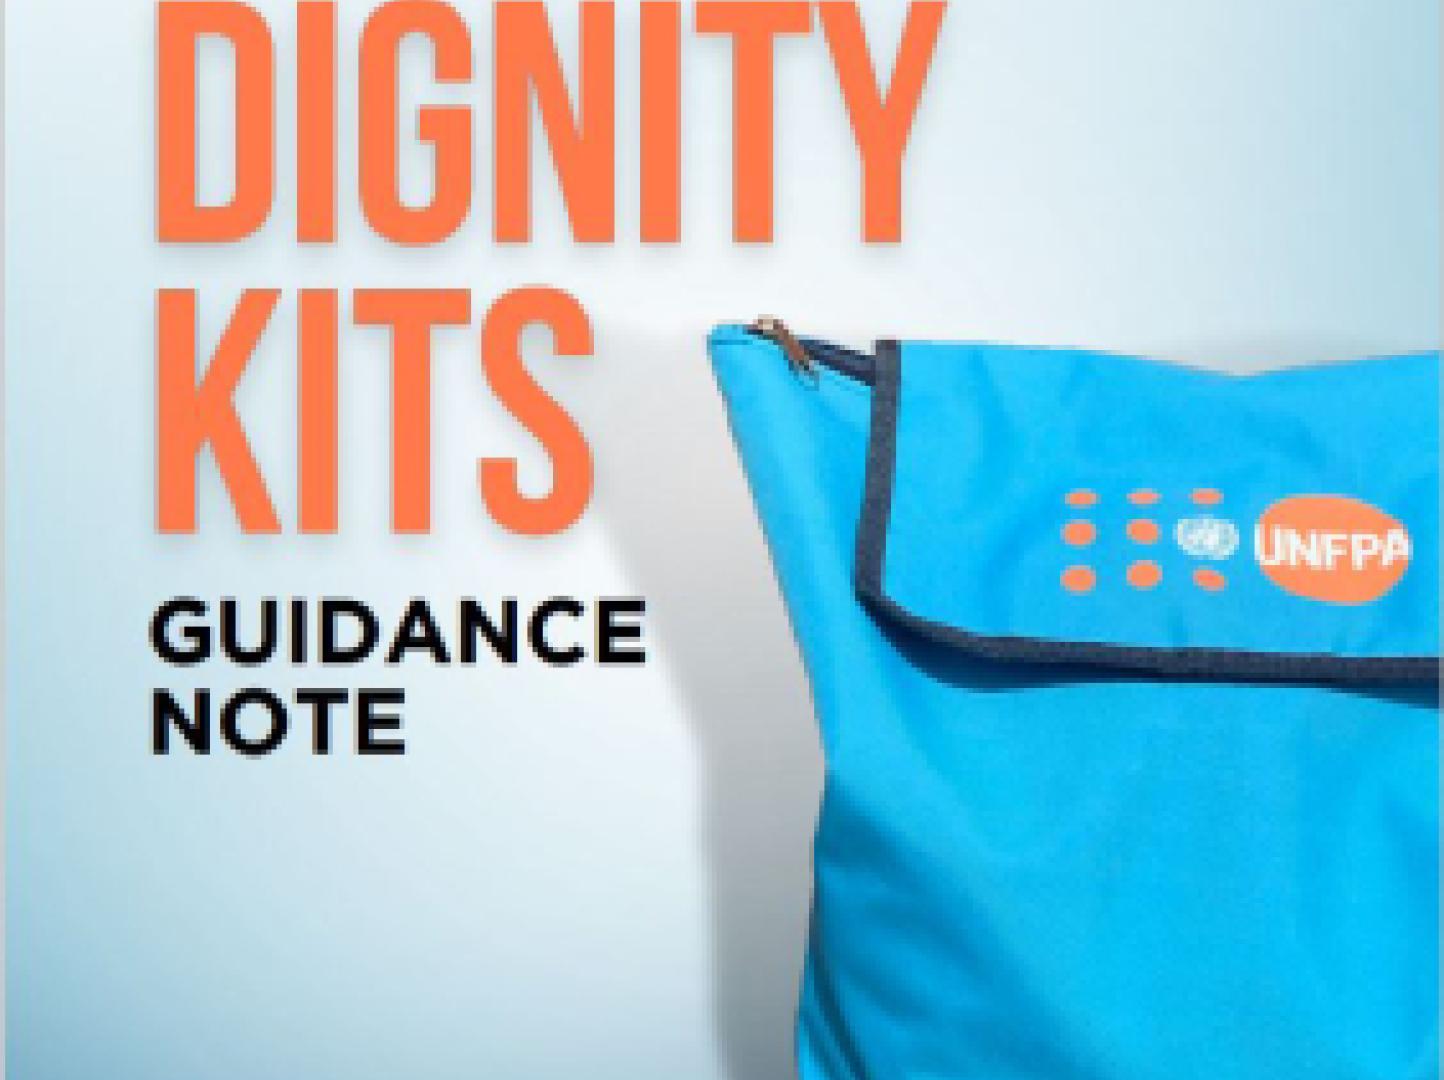 Cover of Guidance Note -UNFPA bag against white background